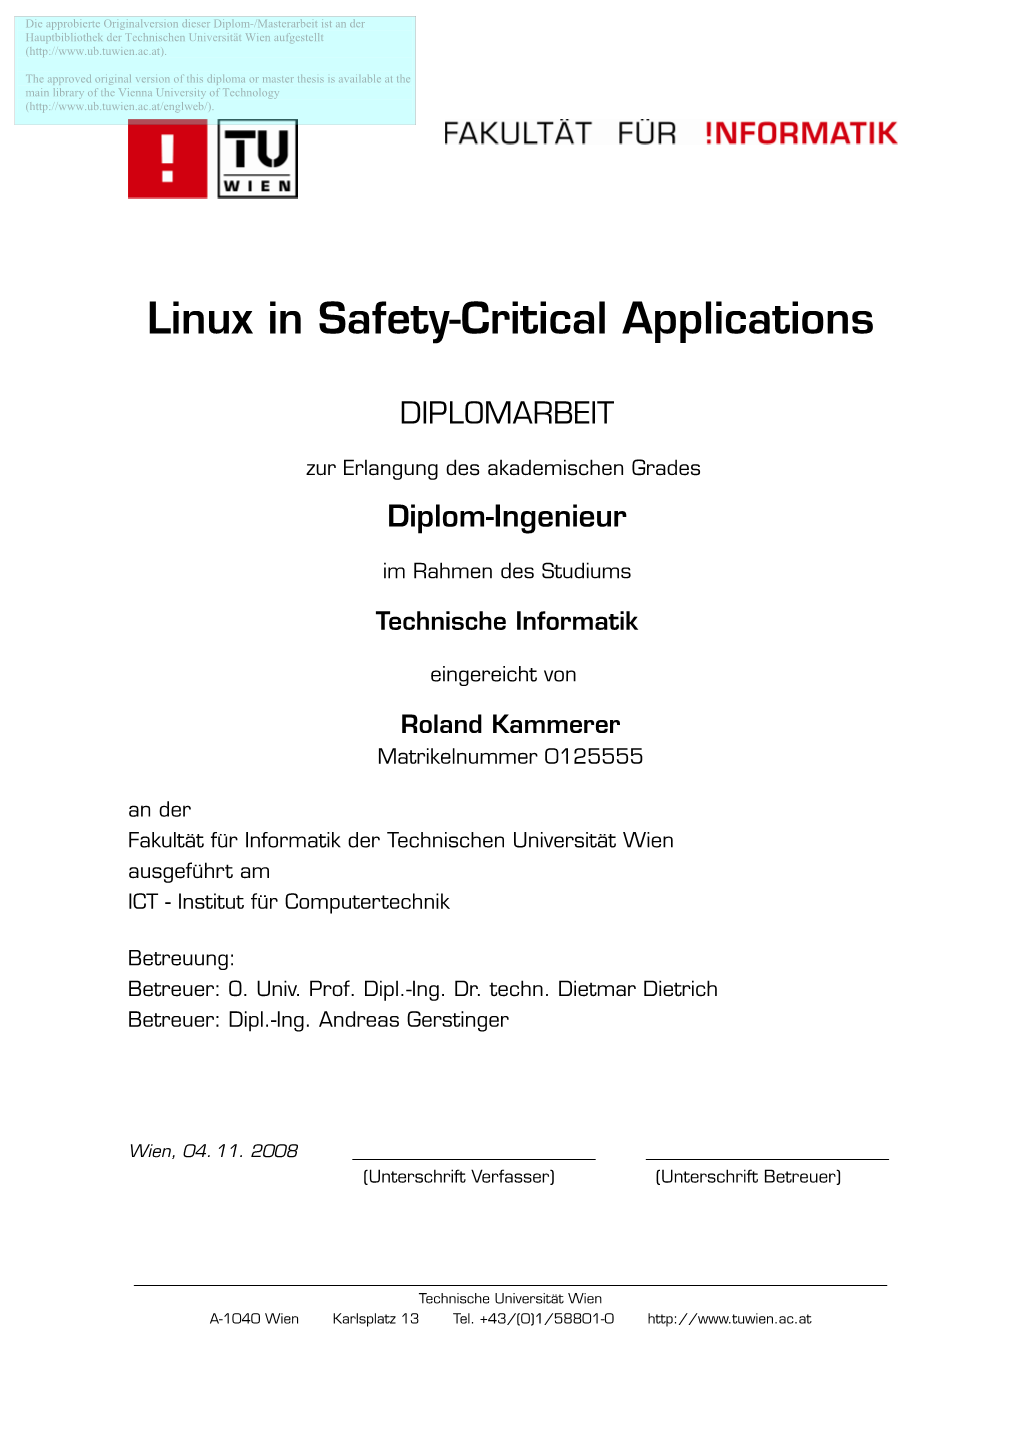 Linux in Safety-Critical Applications